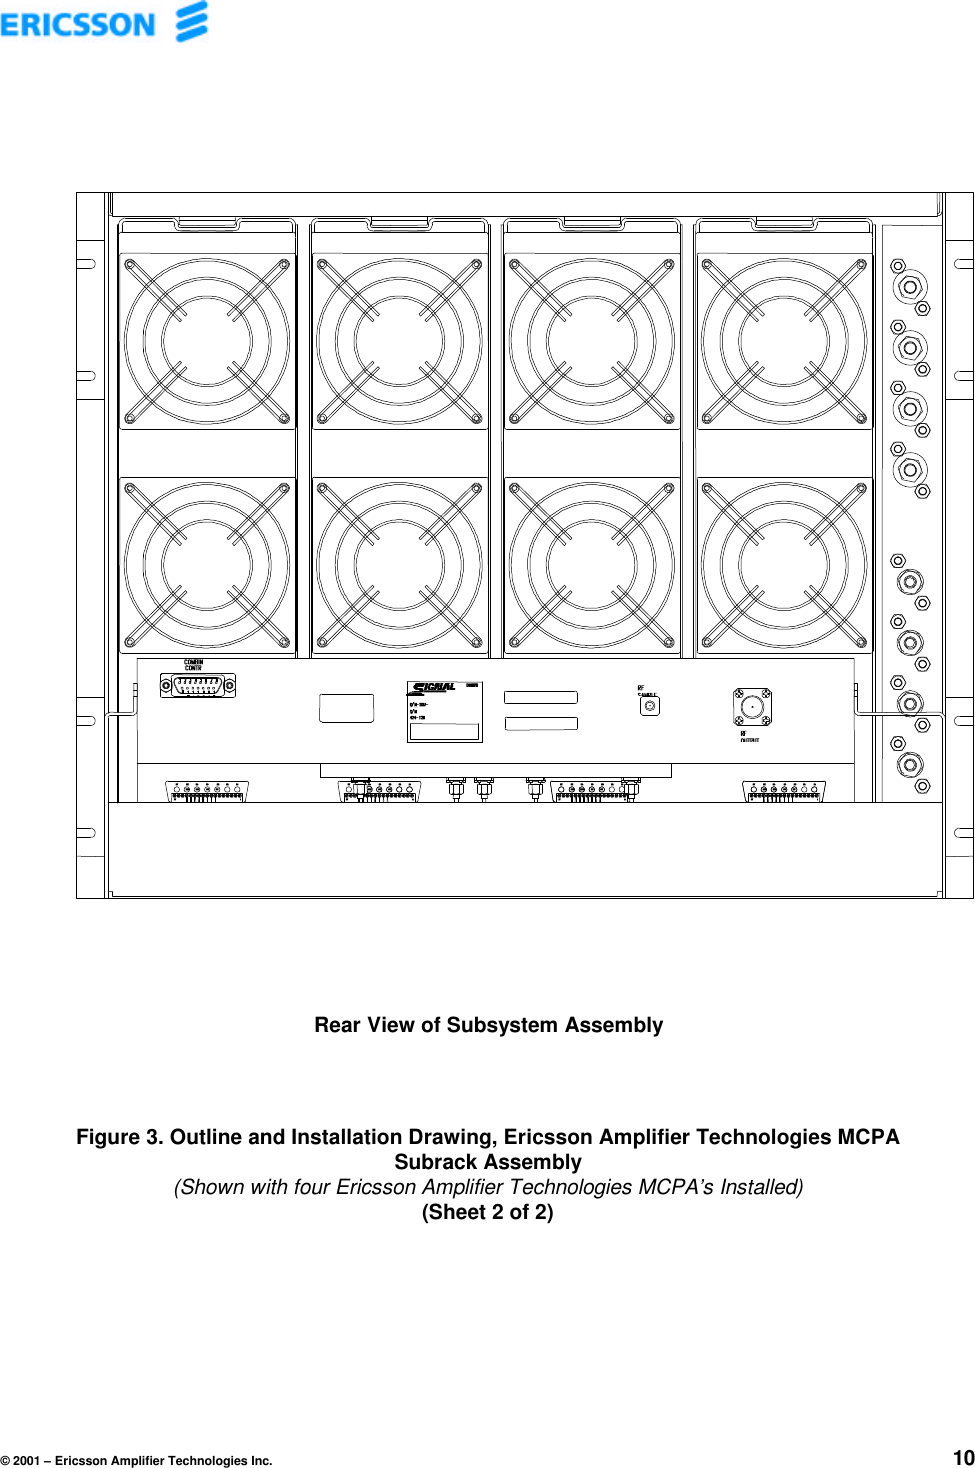 © 2001 – Ericsson Amplifier Technologies Inc. 10Rear View of Subsystem AssemblyFigure 3. Outline and Installation Drawing, Ericsson Amplifier Technologies MCPASubrack Assembly(Shown with four Ericsson Amplifier Technologies MCPA’s Installed)(Sheet 2 of 2)